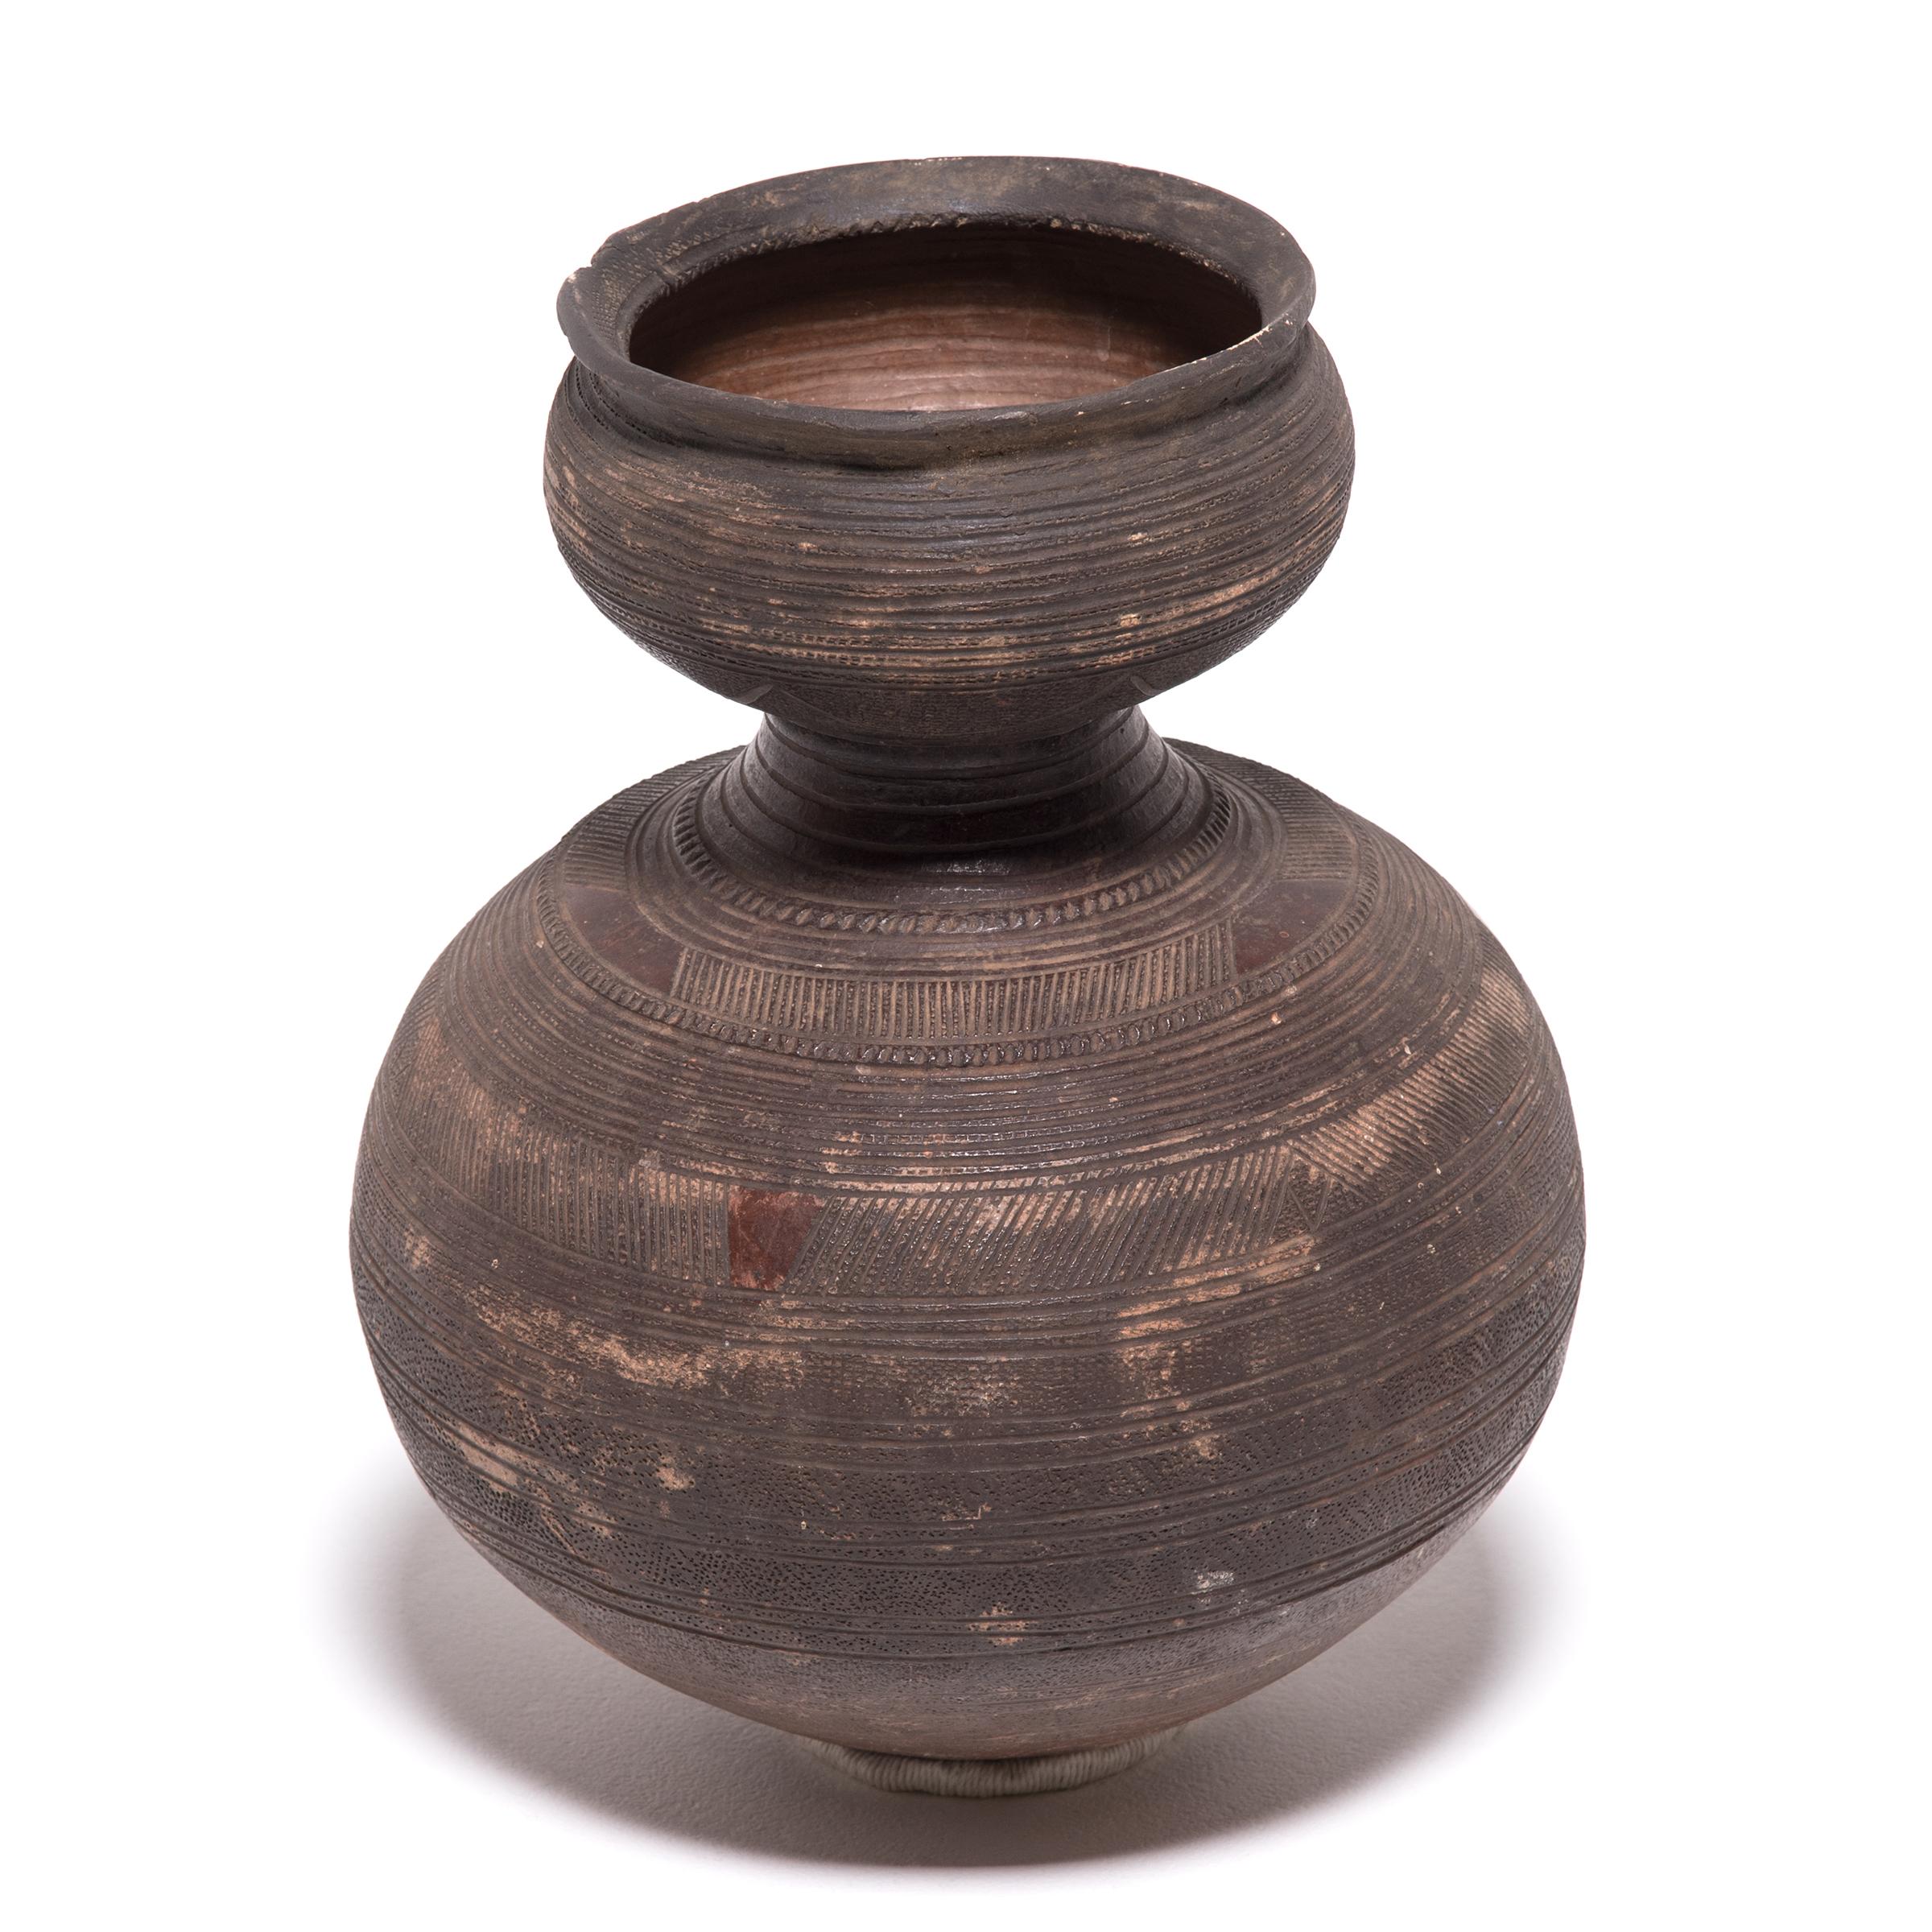 Inspired by the natural world, Nupe ceramicists fired this water vessel in the shape of a gourd. The vessel's varied surface textures and colors come from its functional design. The dimpling and geometric markings were engraved to give the drinker a